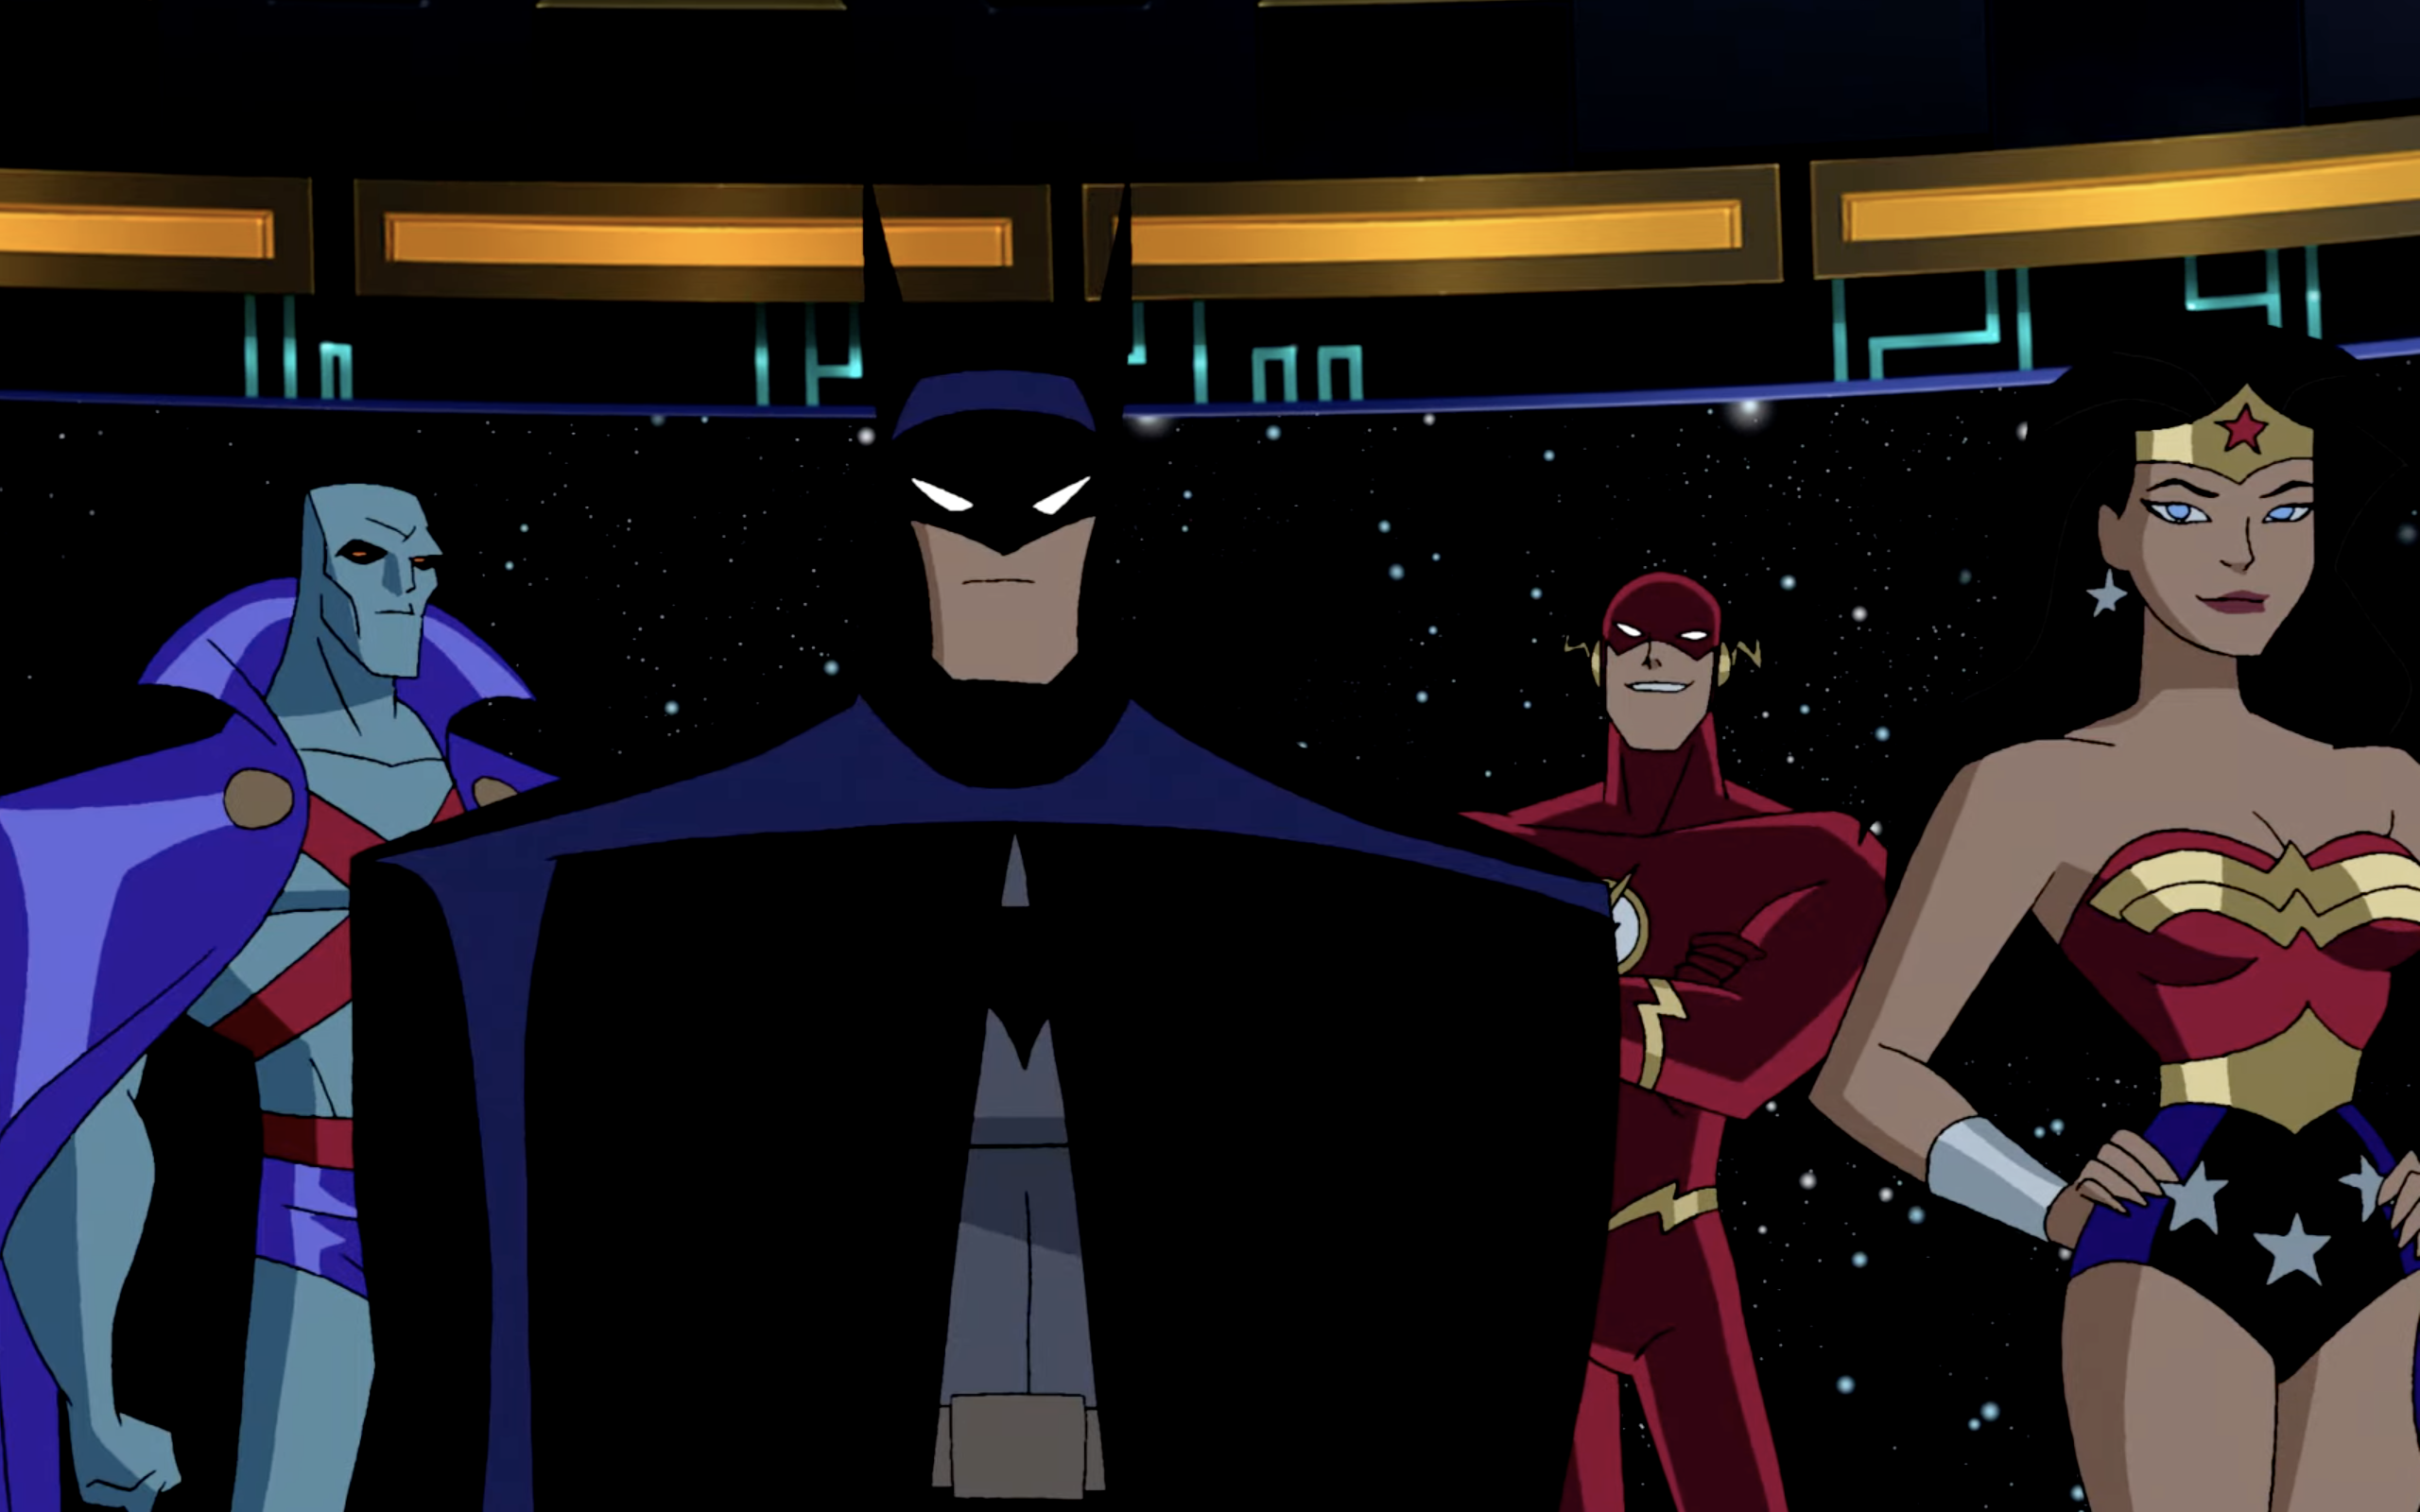 Batman is standing with Wonder Woman and The Flash.